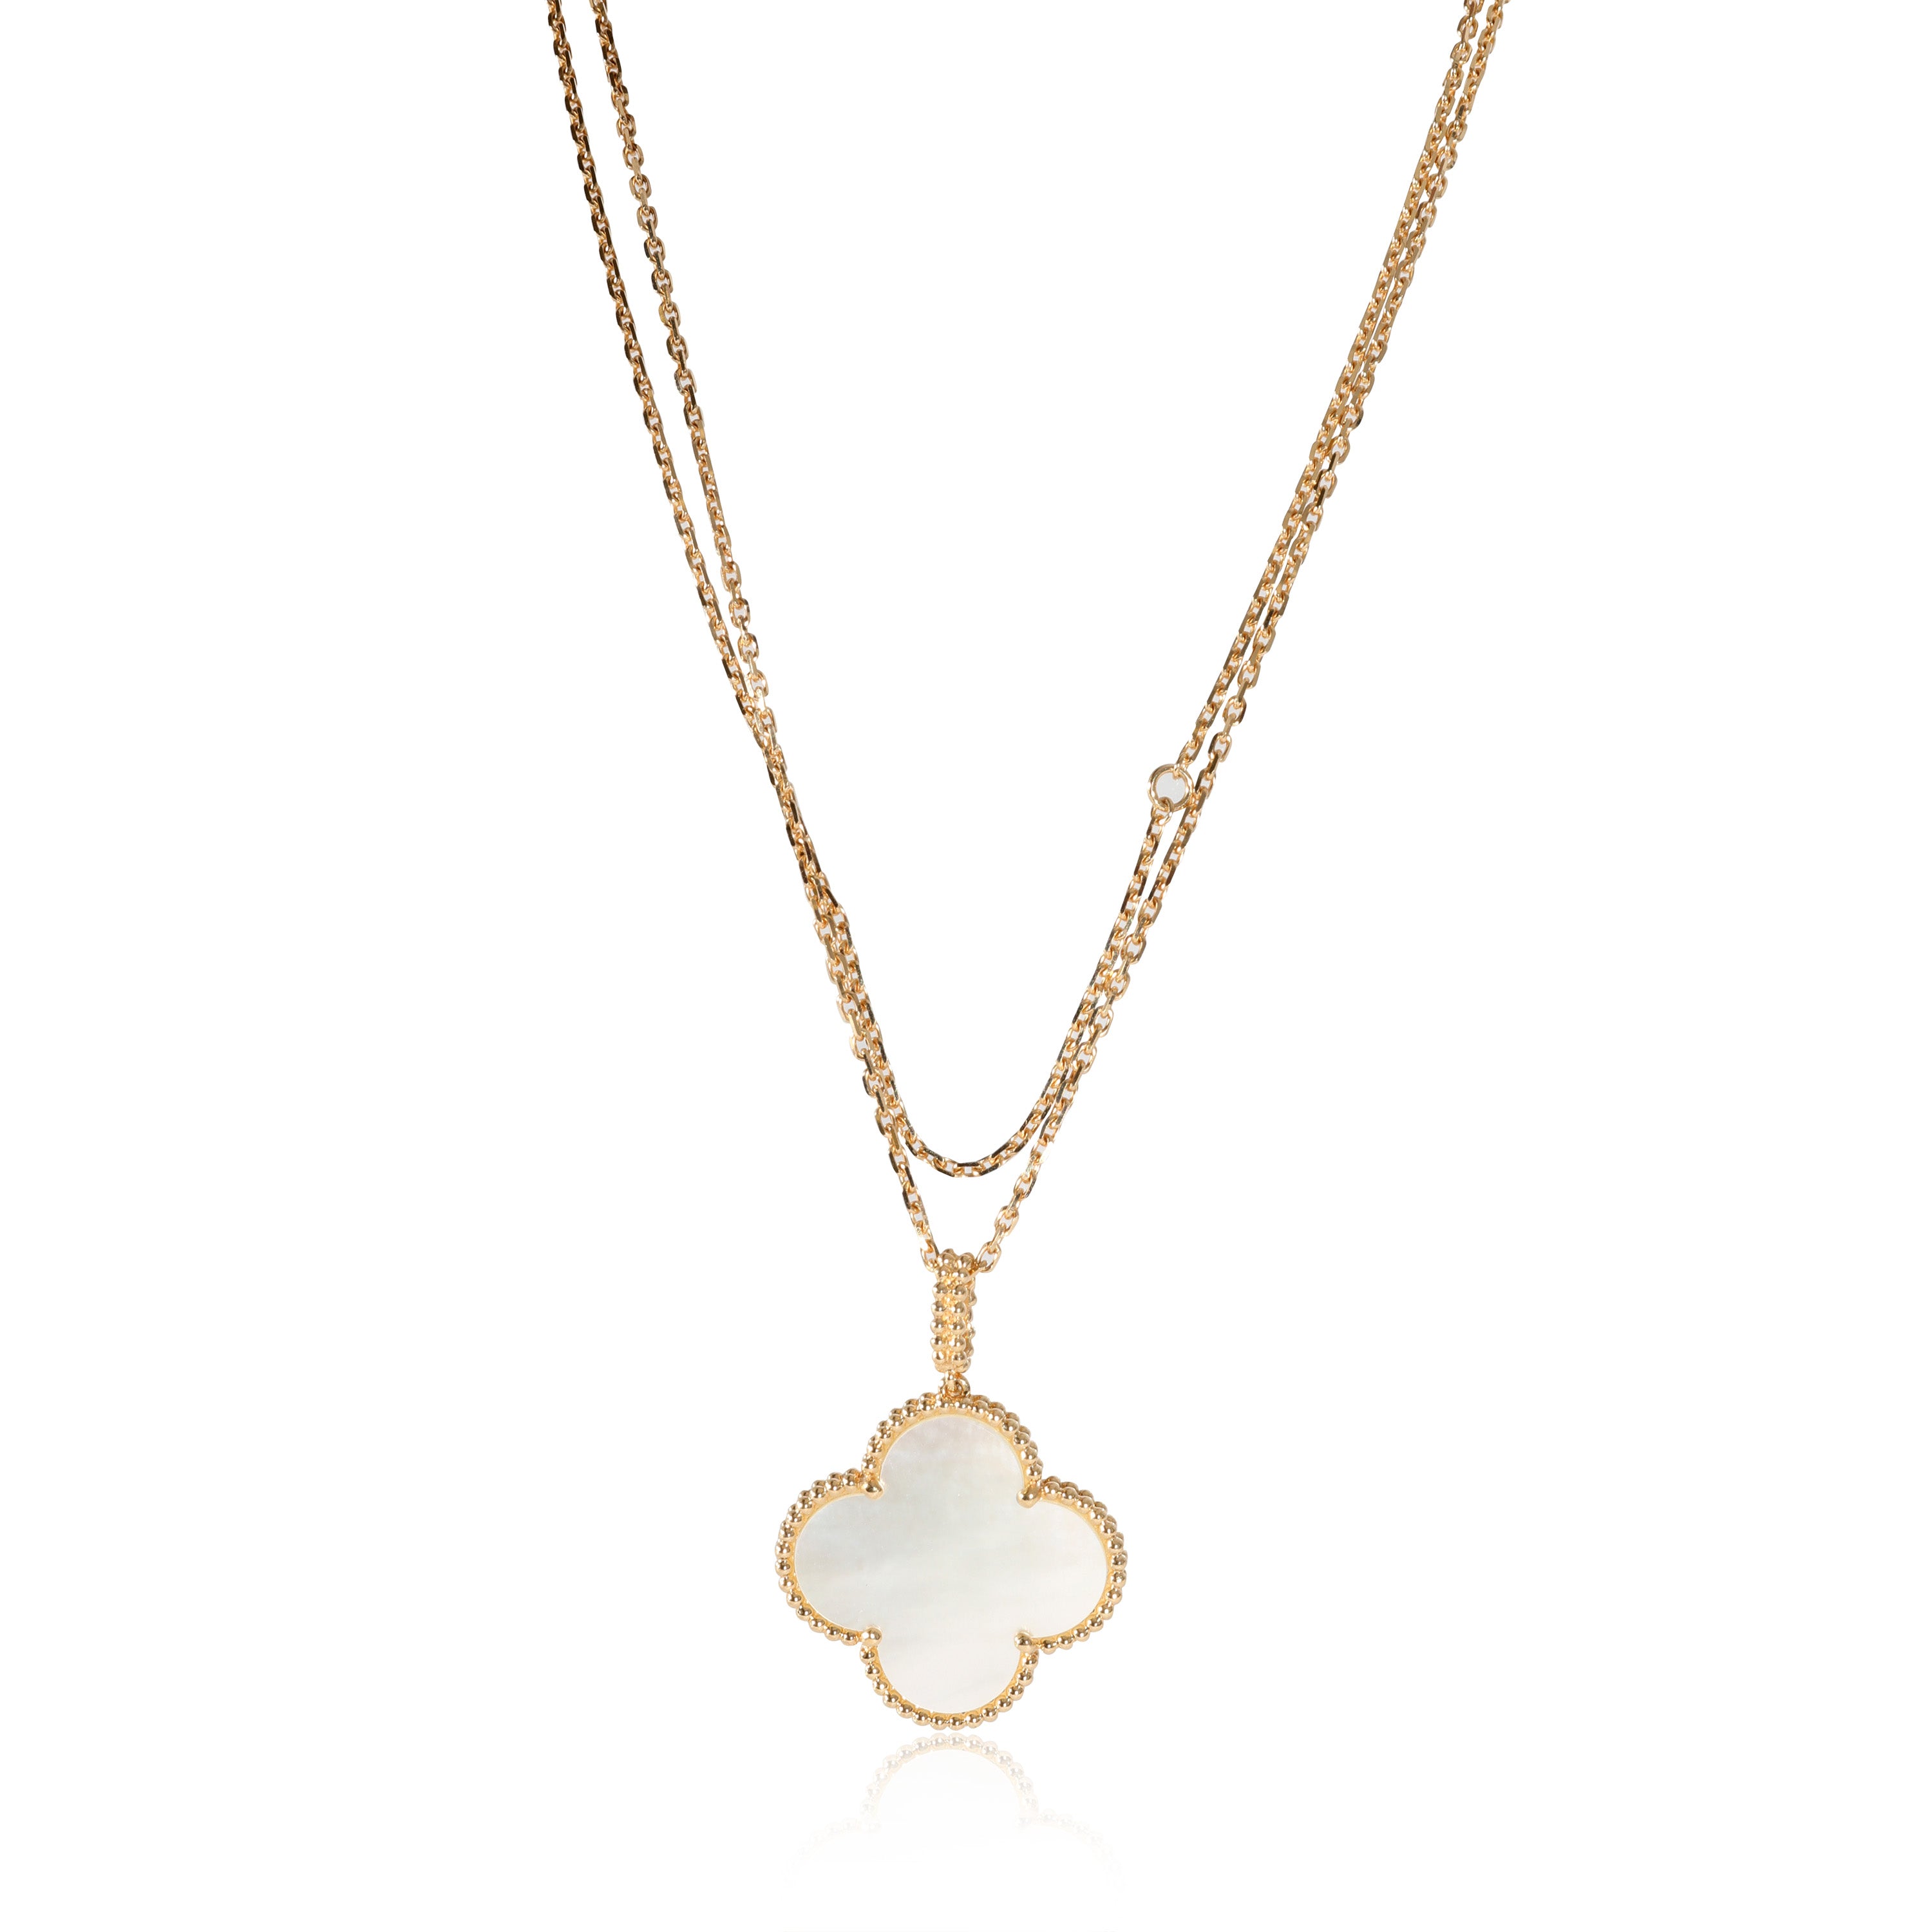 Pure fake Van Cleef & Arpels Alhambra long necklace yellow gold 14 motifs  white mother-of-pearl : vancleef-jewelry